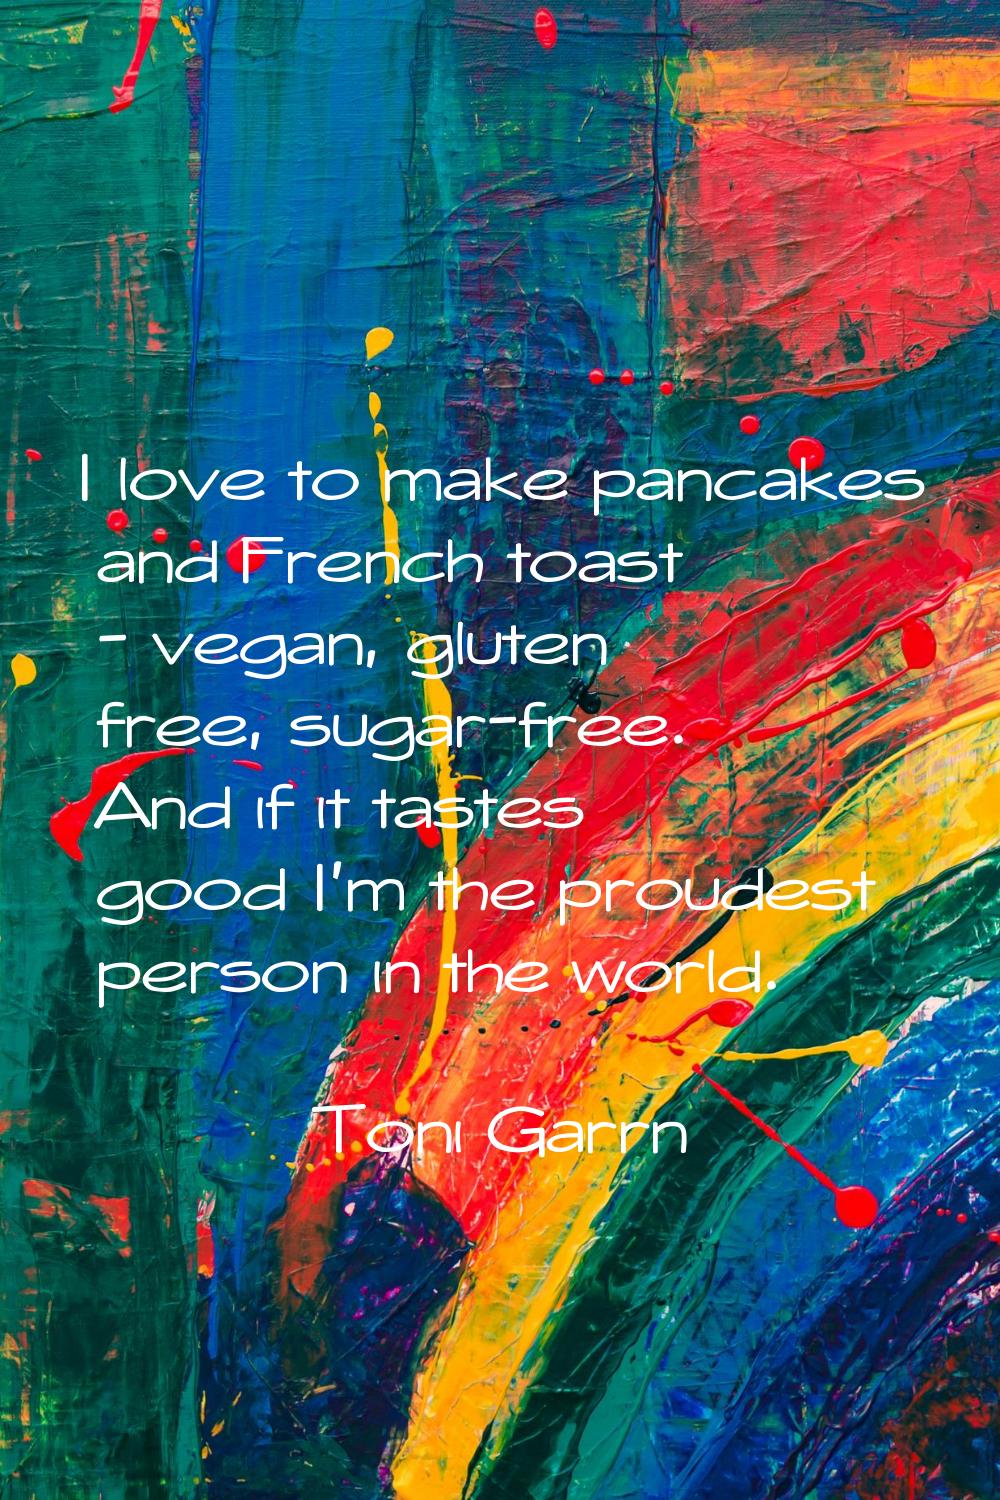 I love to make pancakes and French toast - vegan, gluten free, sugar-free. And if it tastes good I'